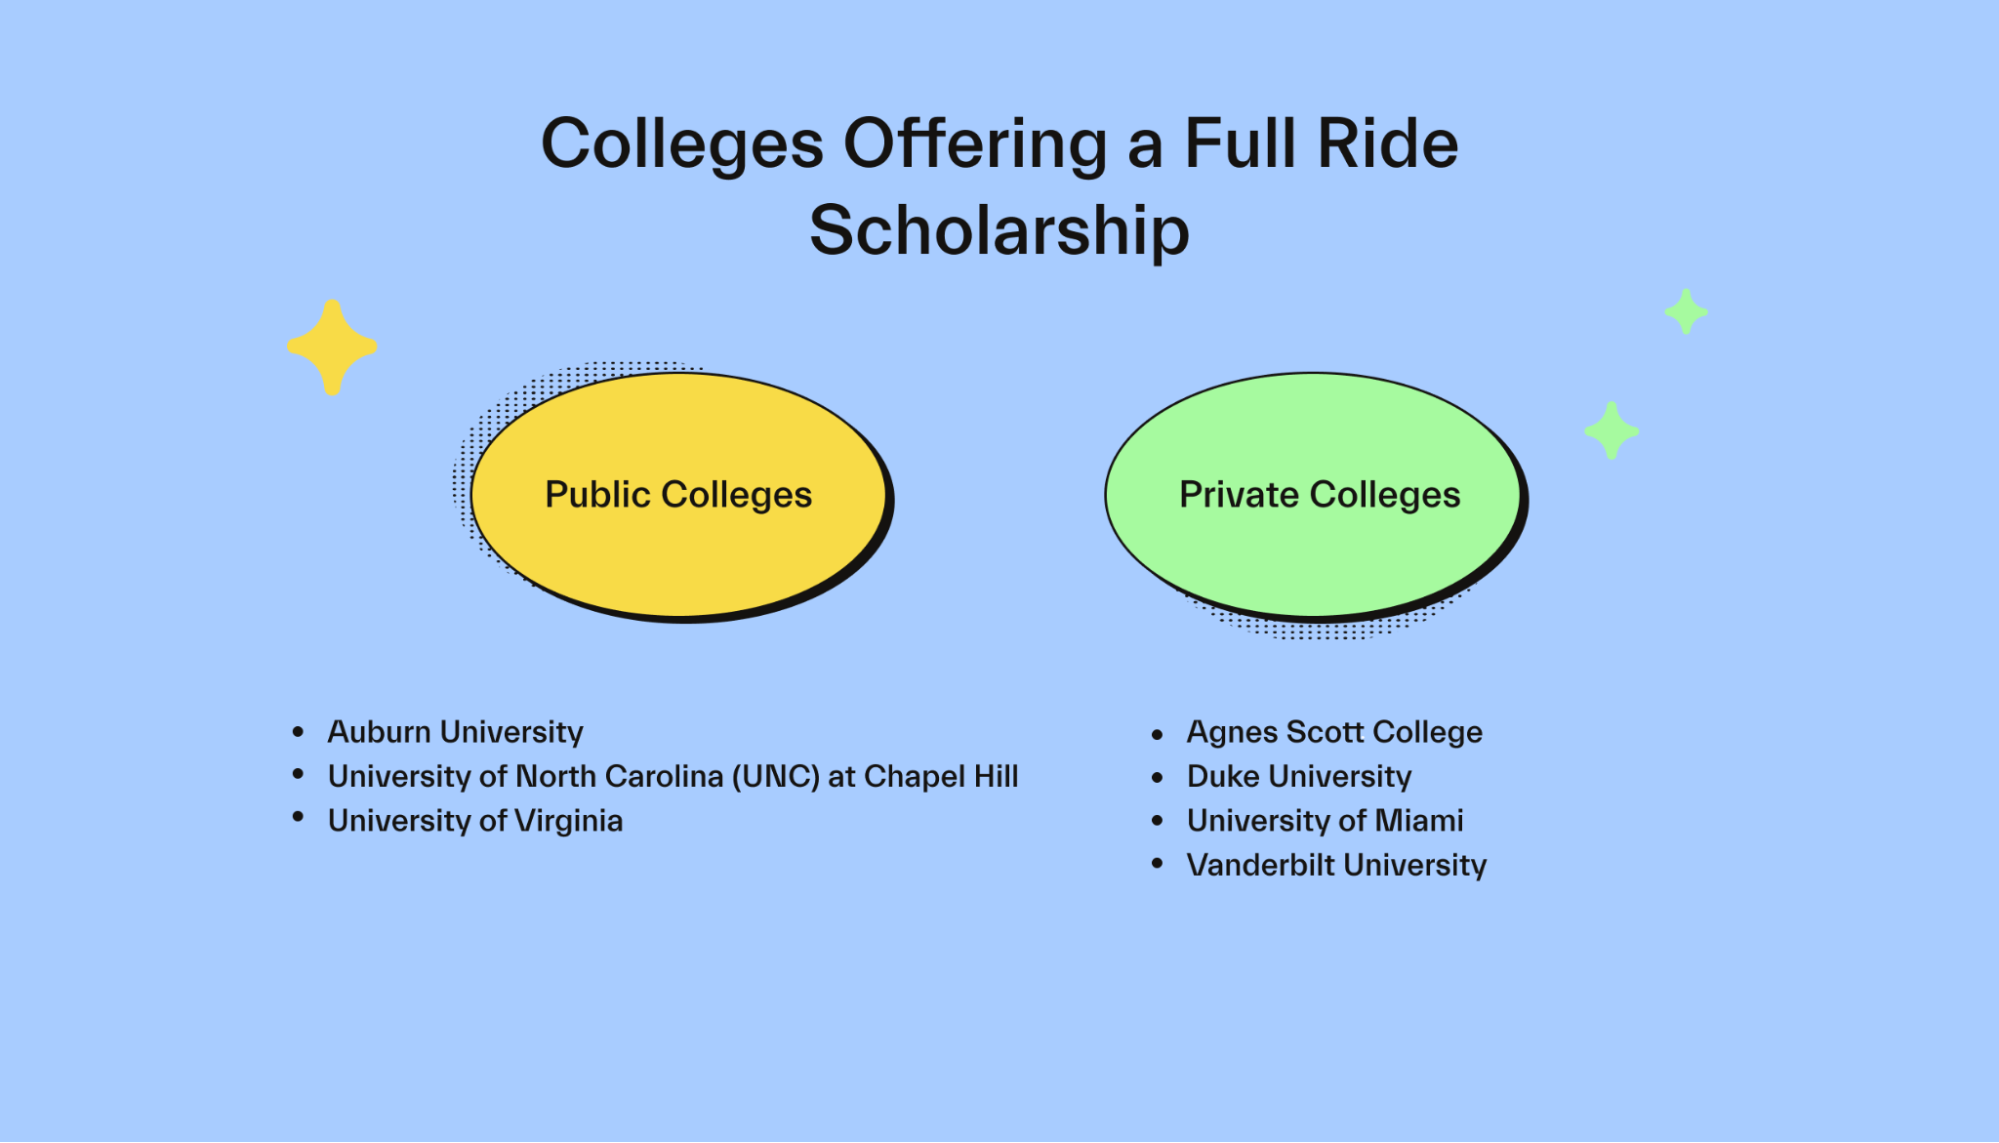 Colleges Offering a Full Ride Scholarship